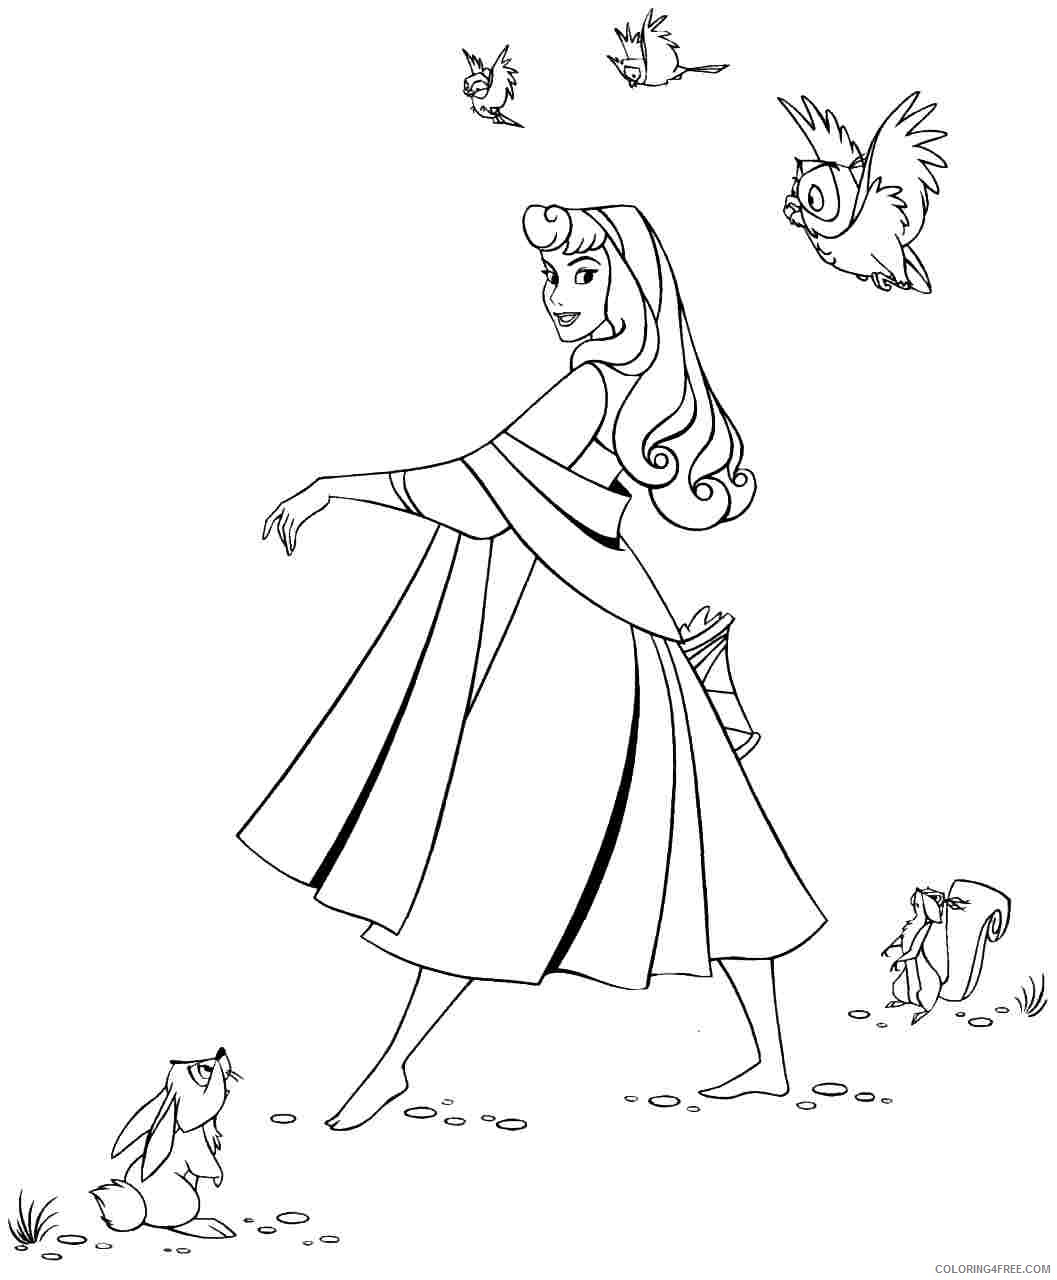 Sleeping Beauty Coloring Pages Cartoons Sleeping Beauty Pictures Printable 2020 5625 Coloring4free